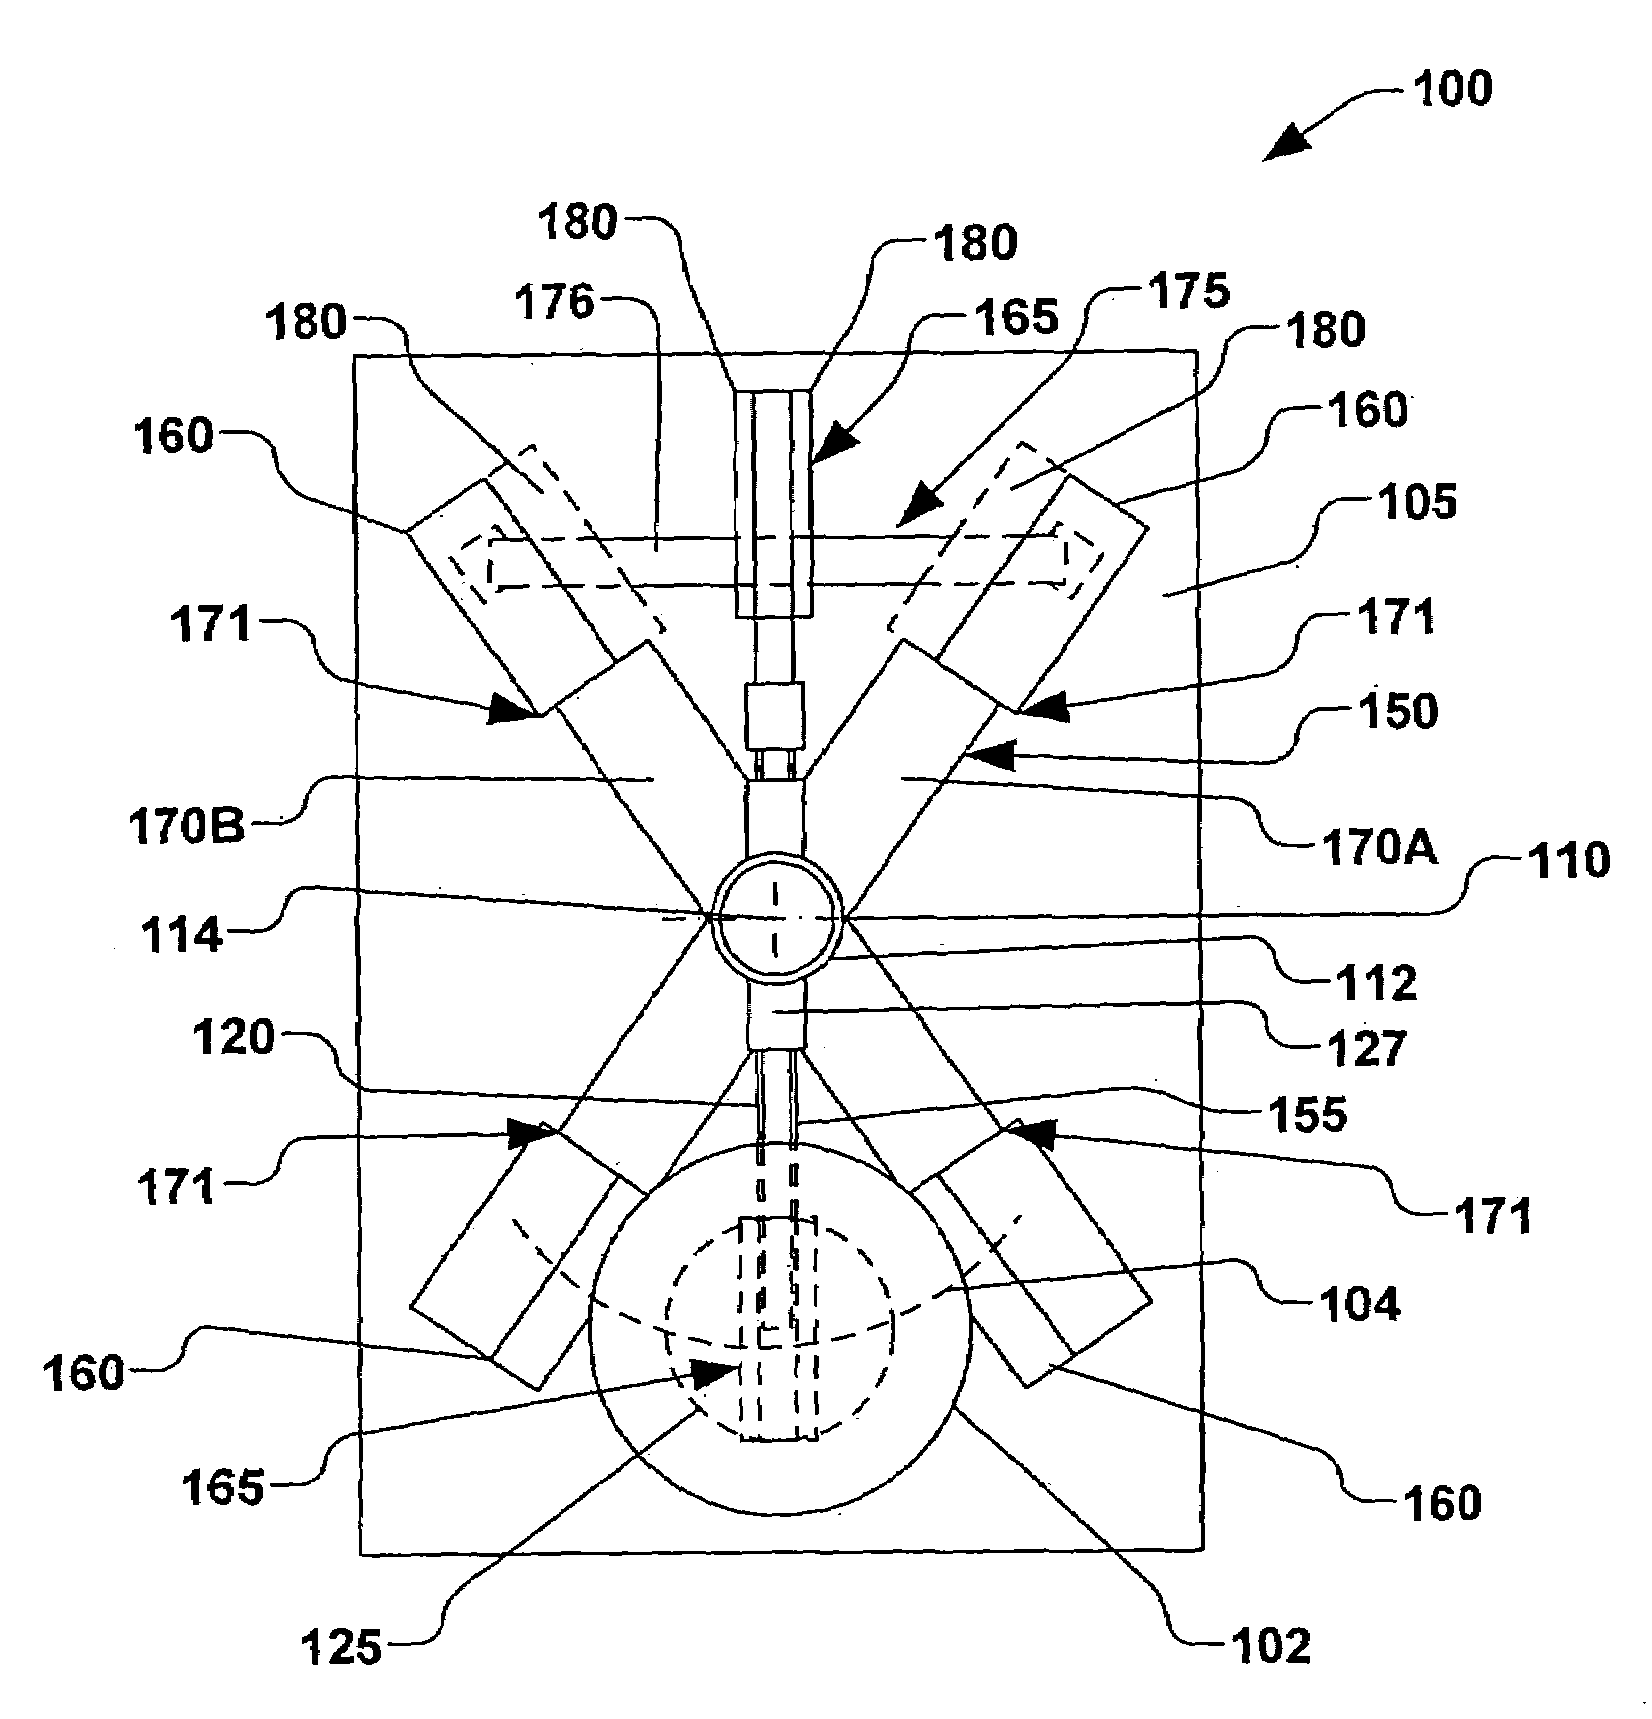 Wafer scanning system with reciprocating rotary motion utilizing springs and counterweights